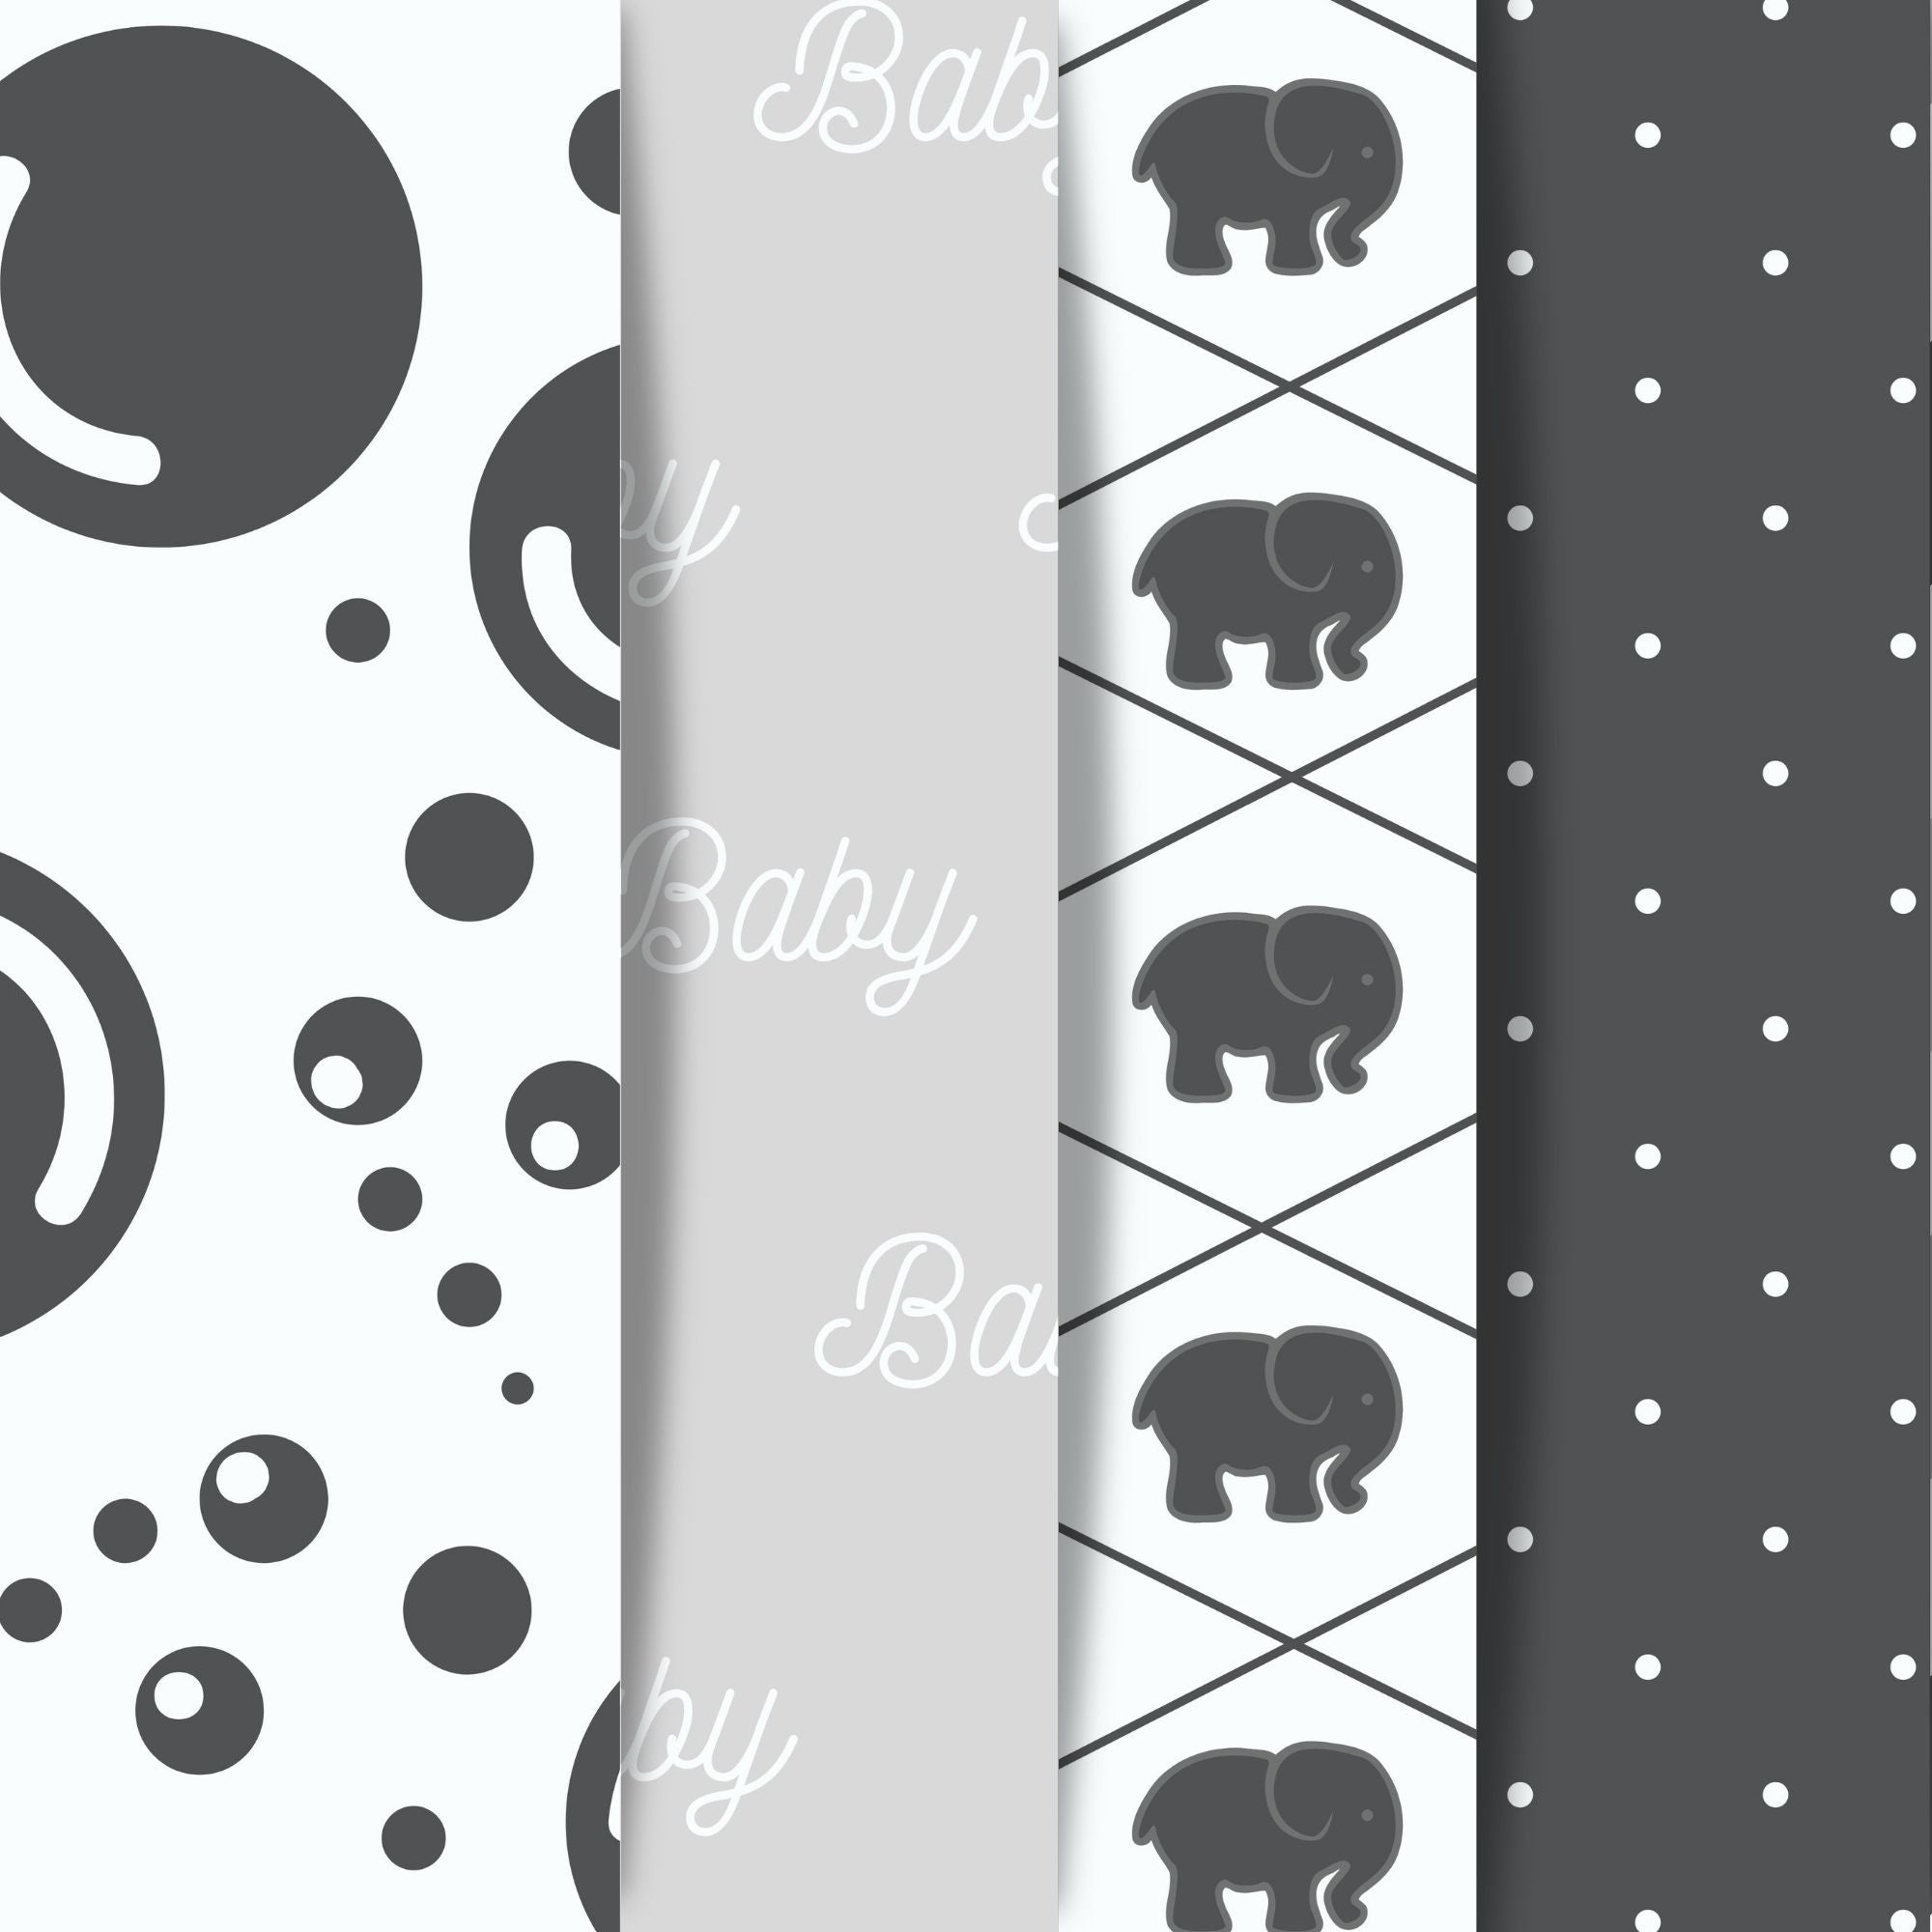 Scrapbookers, this is what you've been looking for! This gray themed baby bundle has 30 unique images that can be printed or used as digital backgrounds.